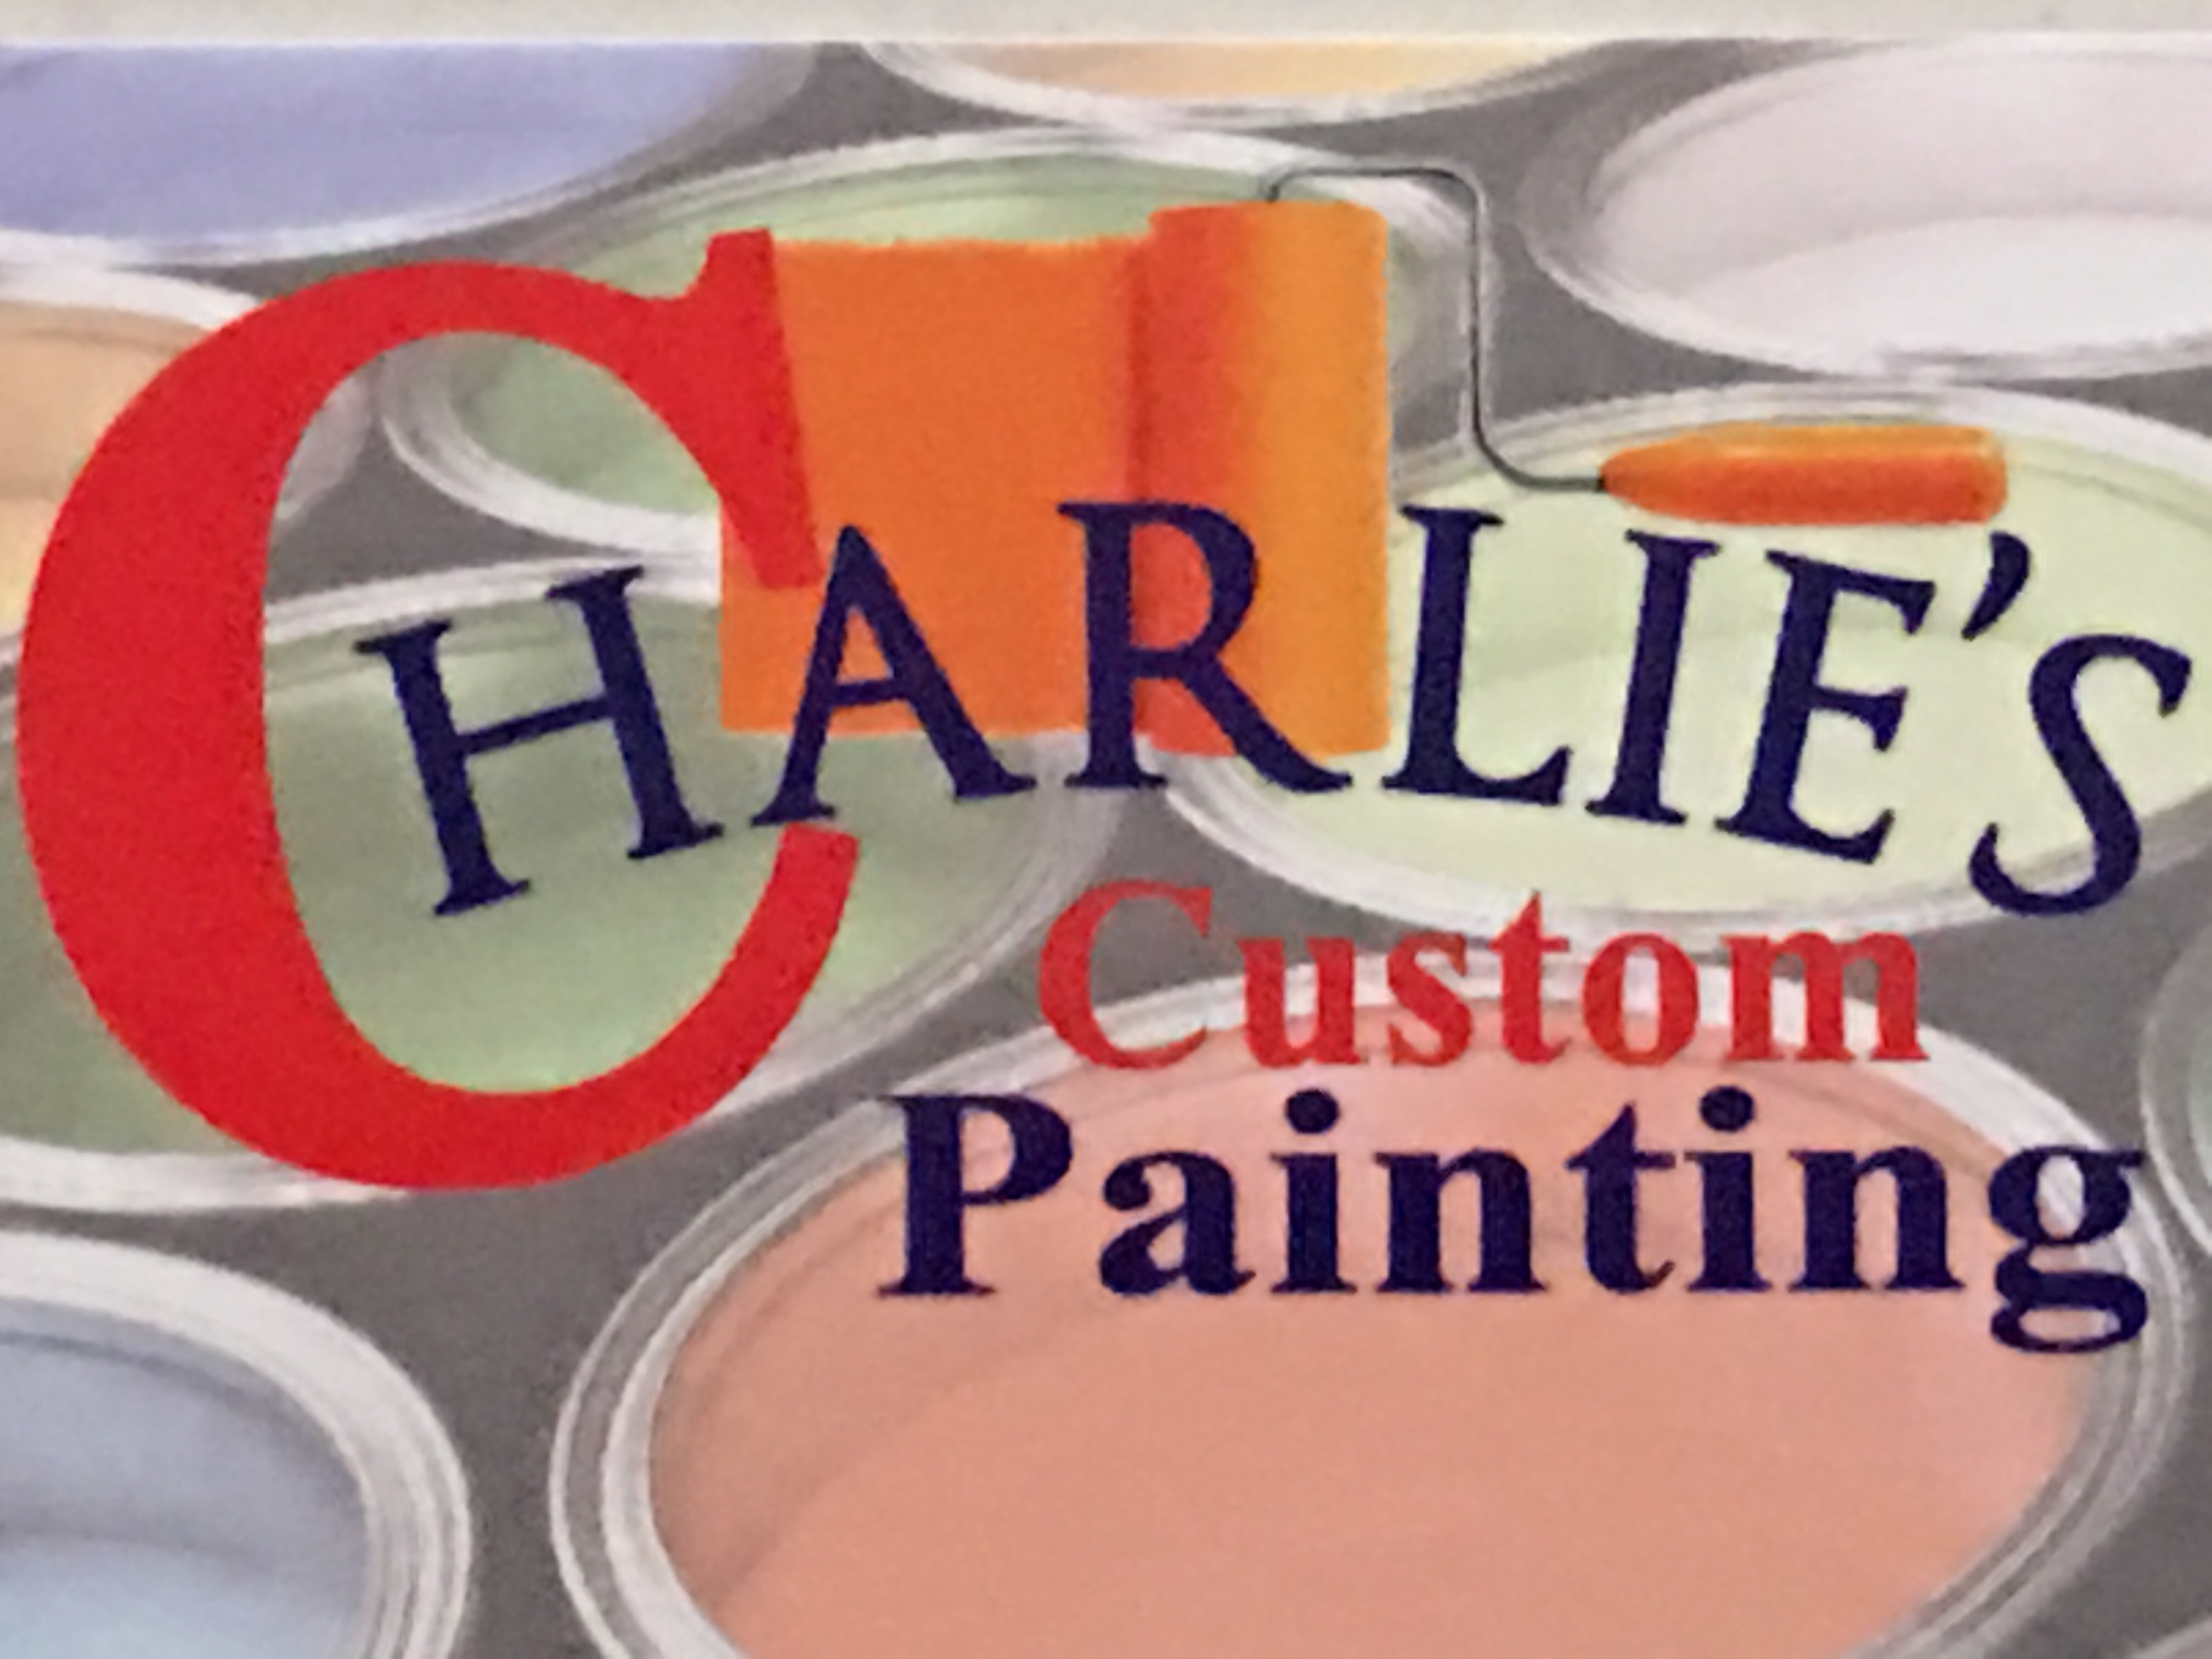 Charlie's Painting Logo